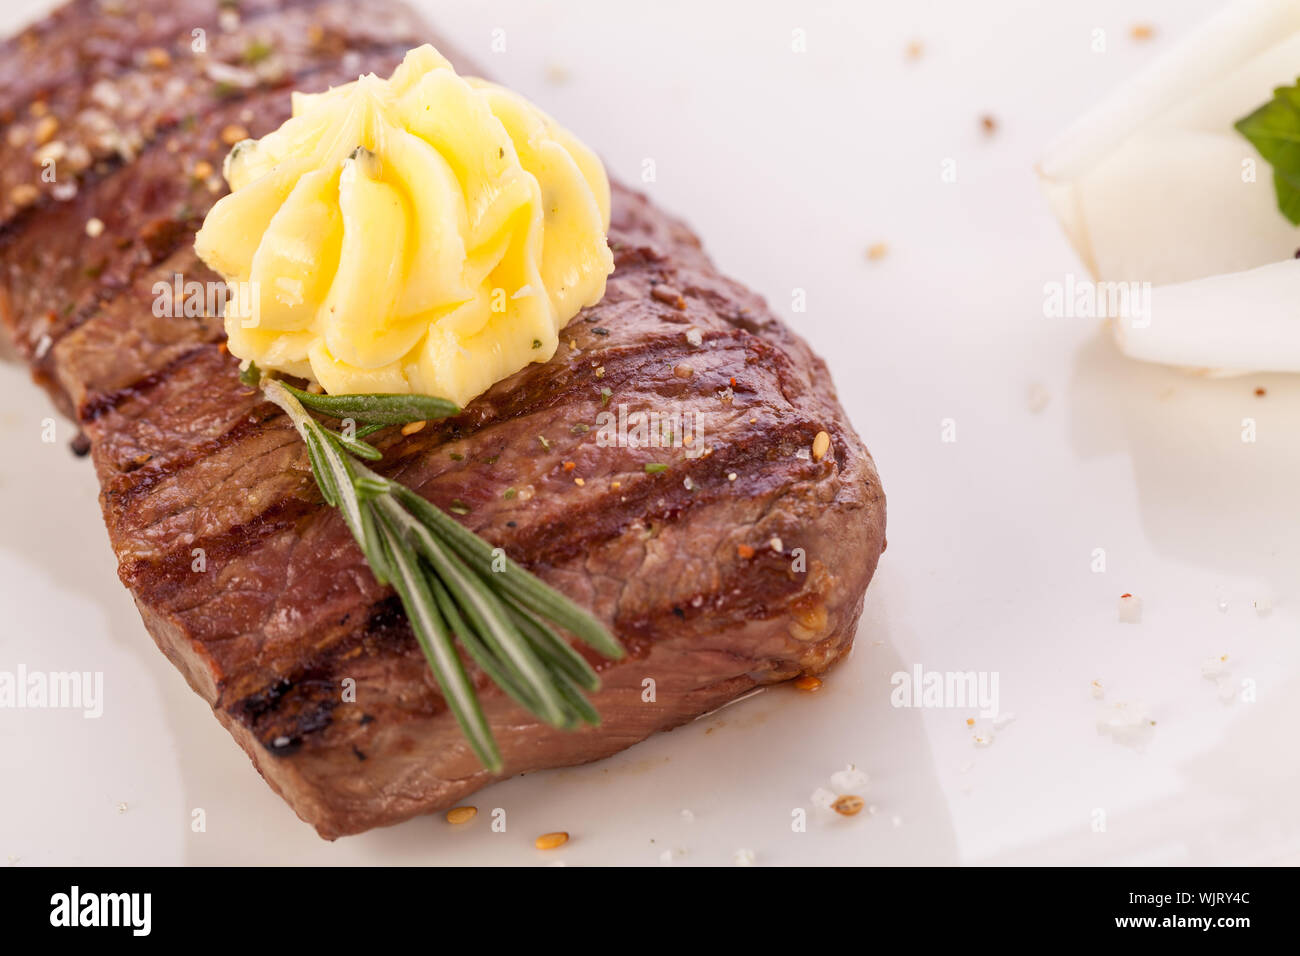 Grilled beef steak topped with butter and rosemary Stock Photo